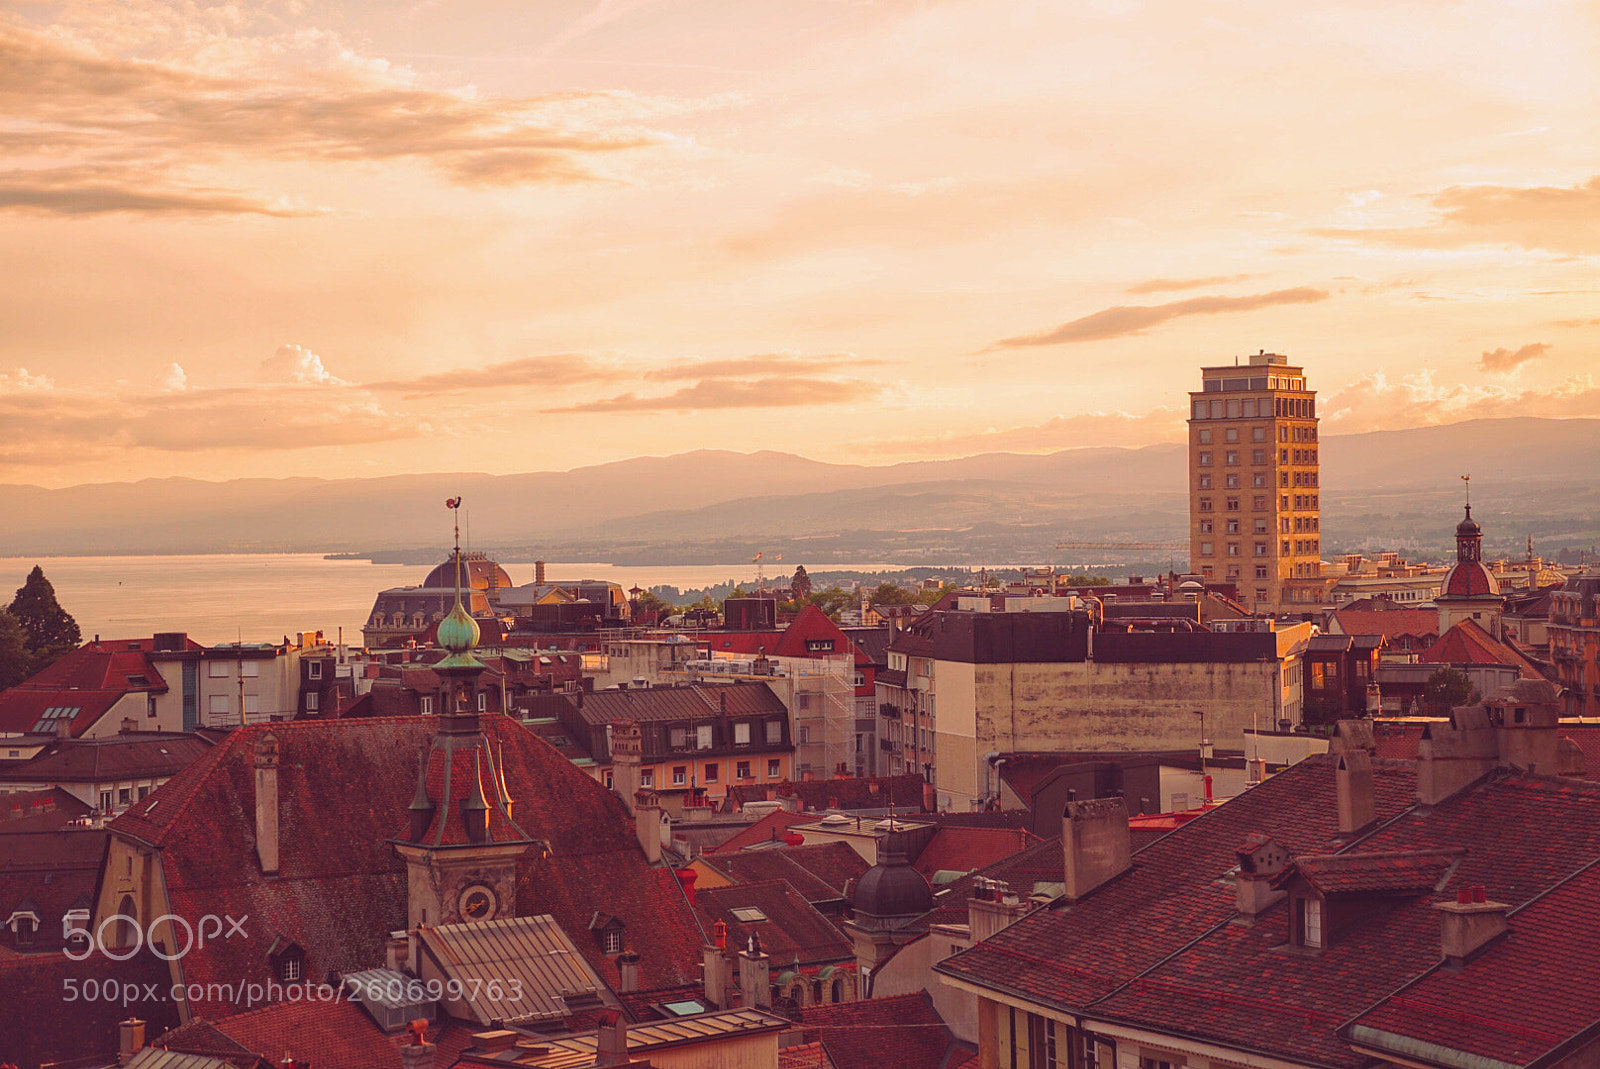 Sony a7 II sample photo. Sunset in lausanne photography